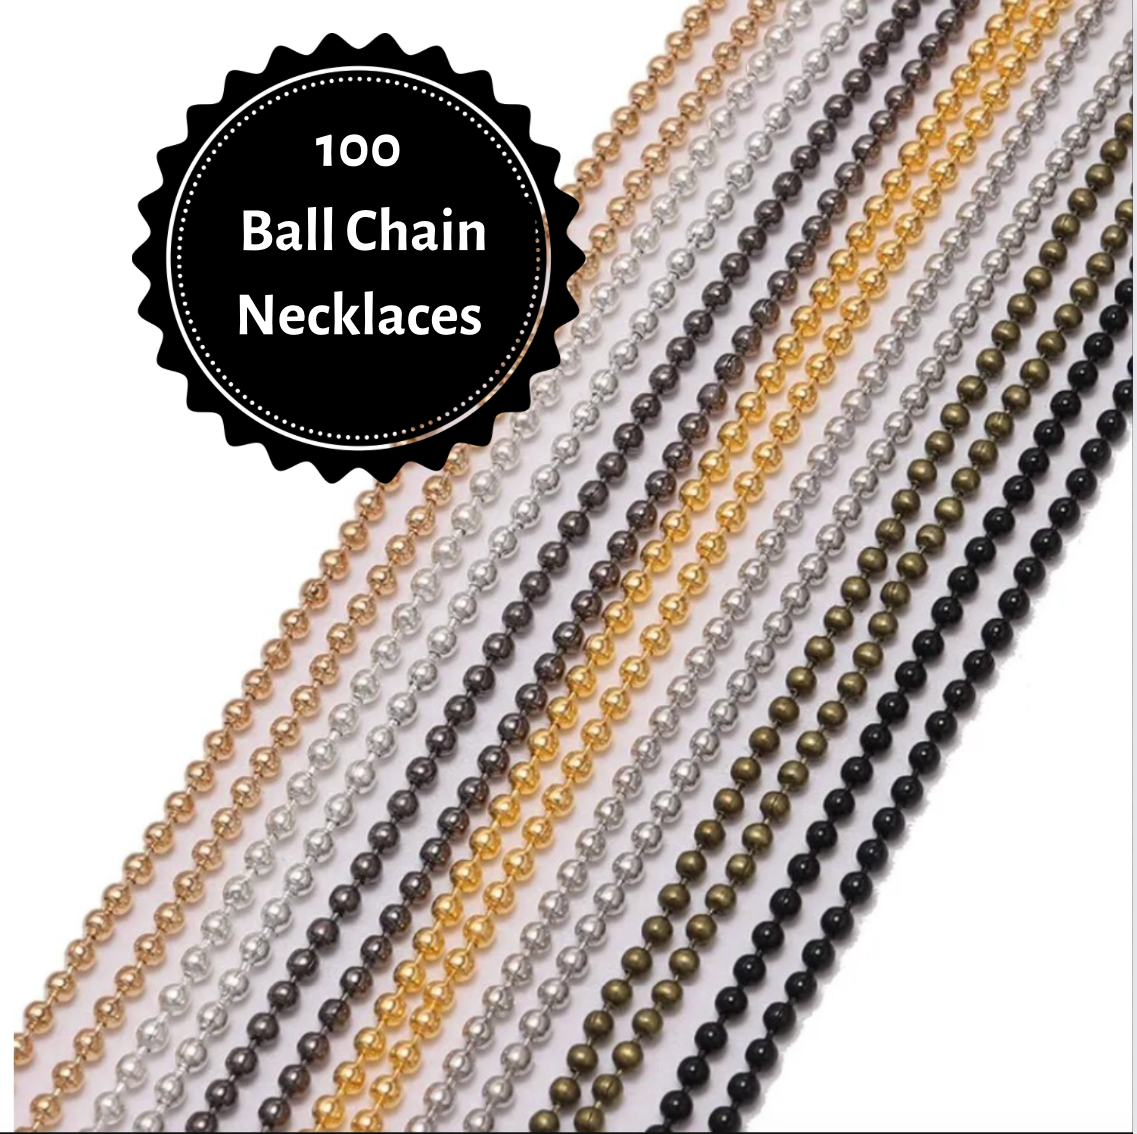 100 Wholesale Ball Chain Necklaces 24" Length